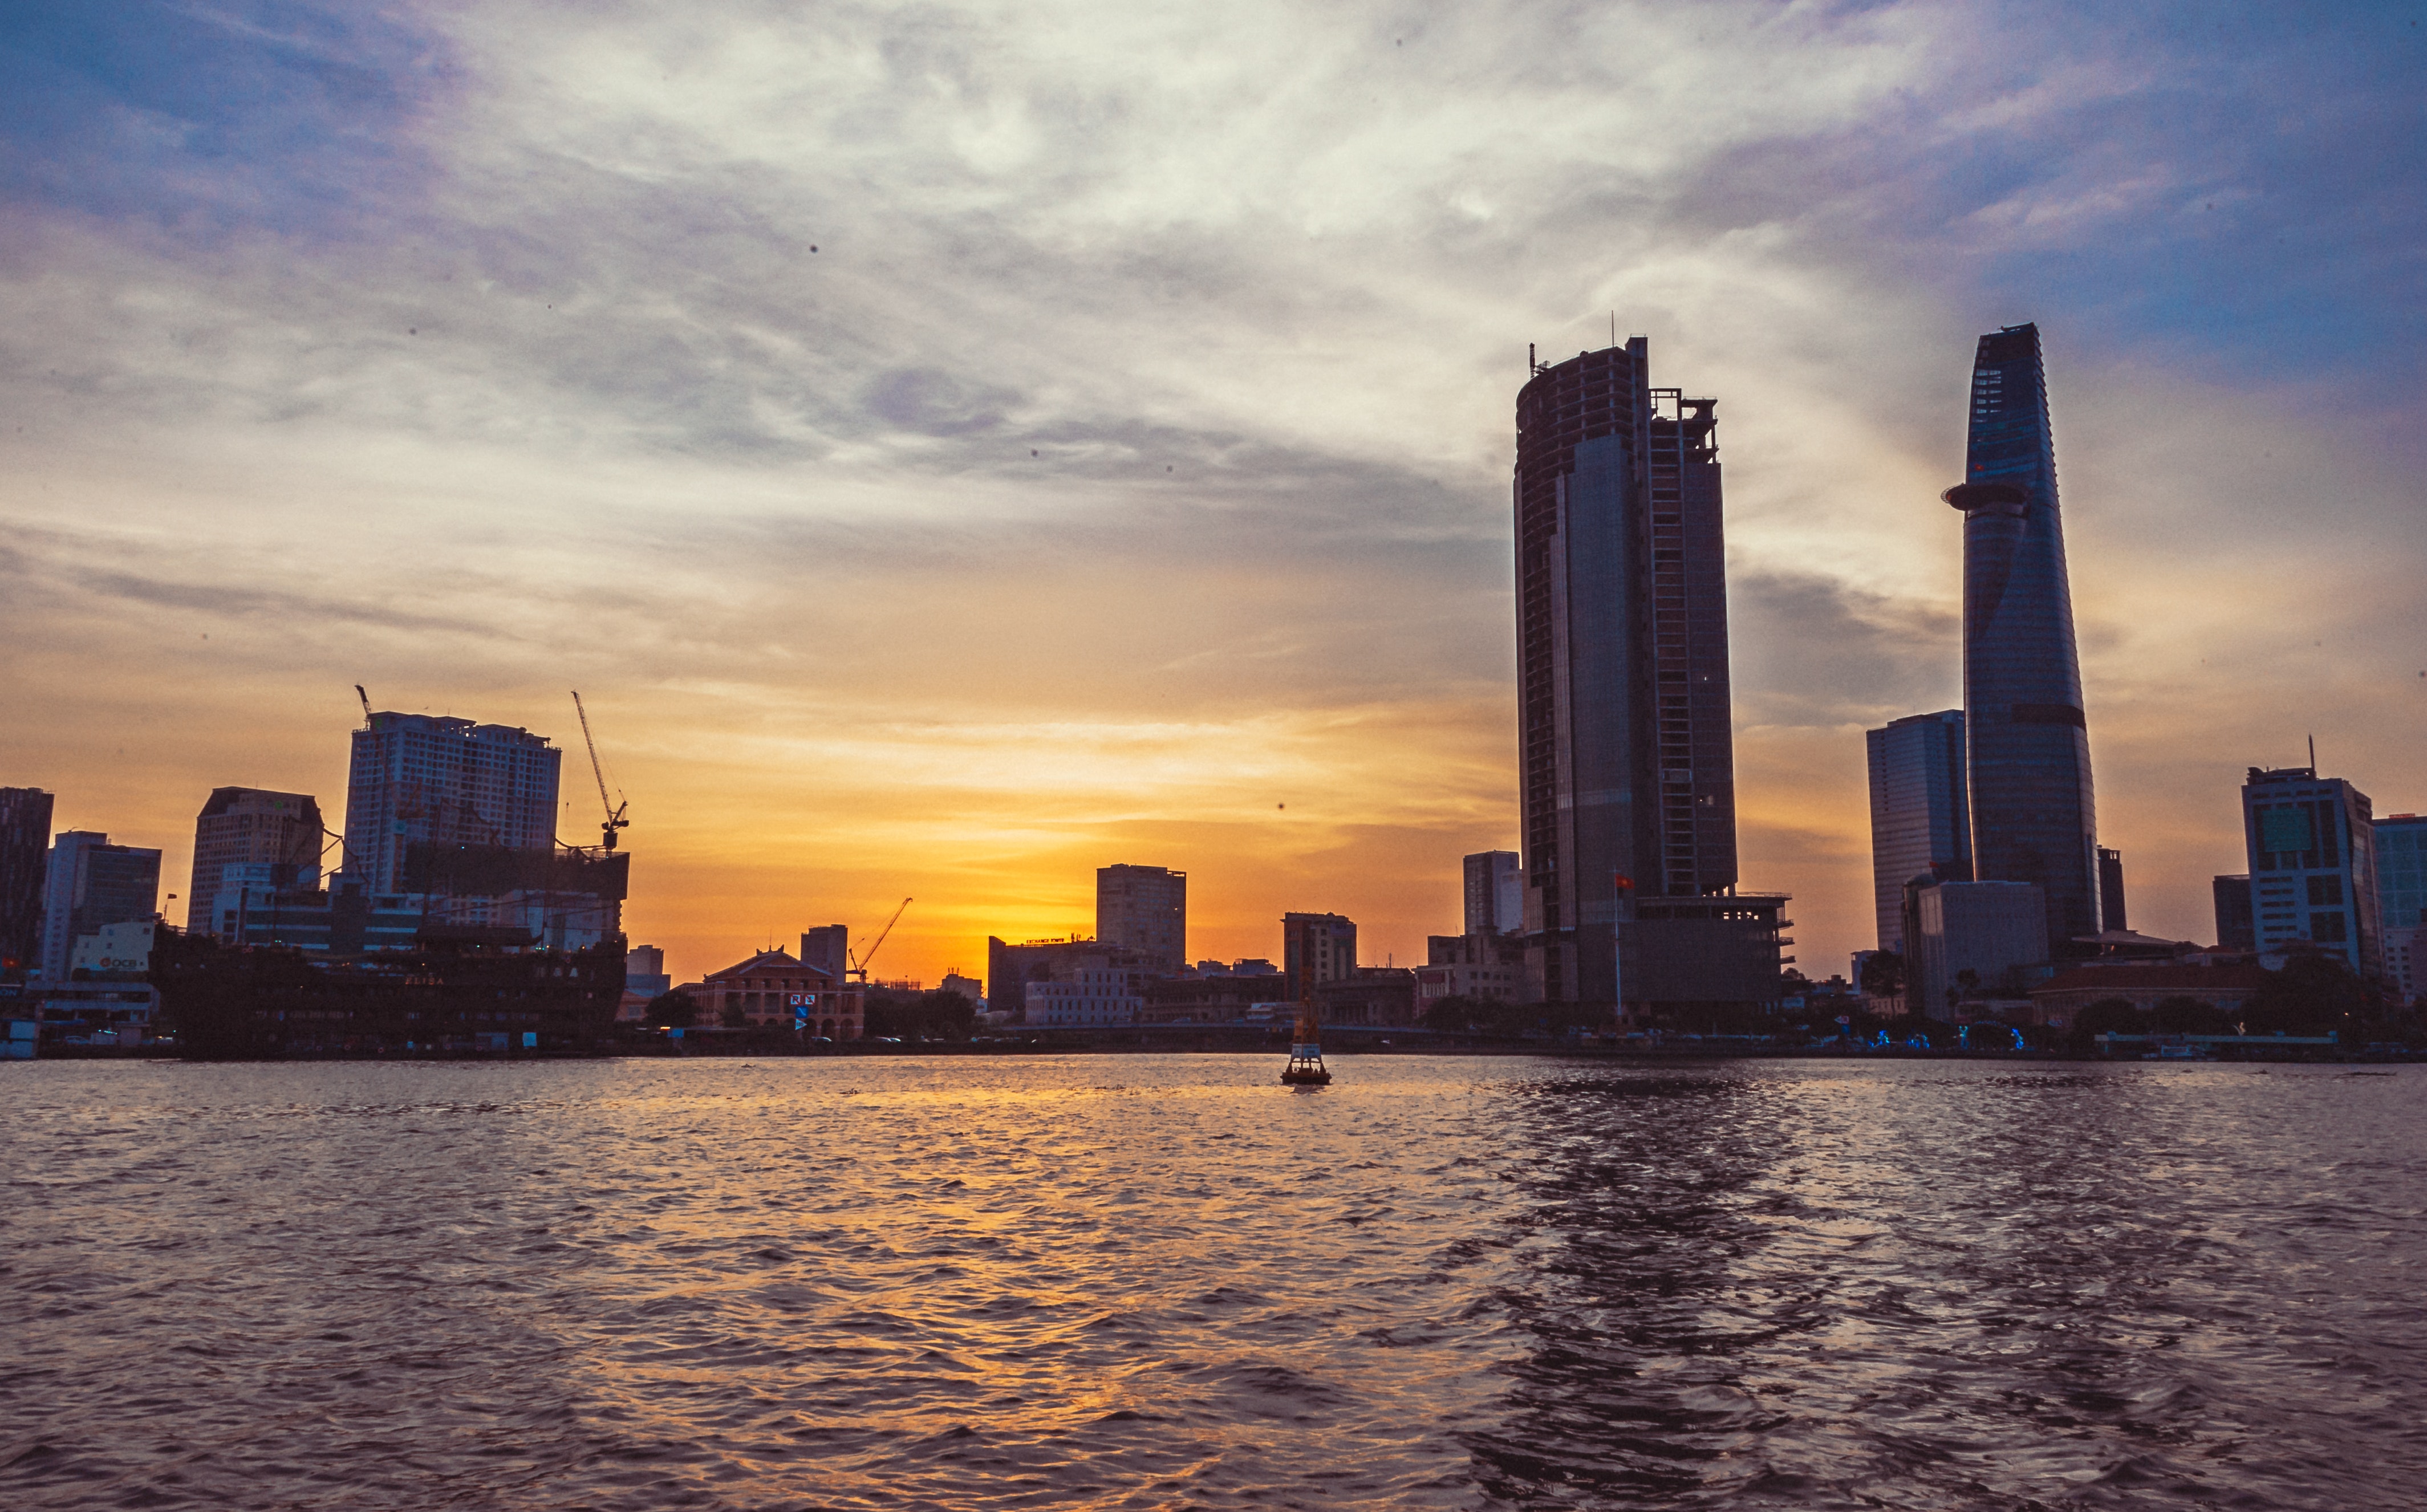 High-rise building in front of body of water during sunset photo